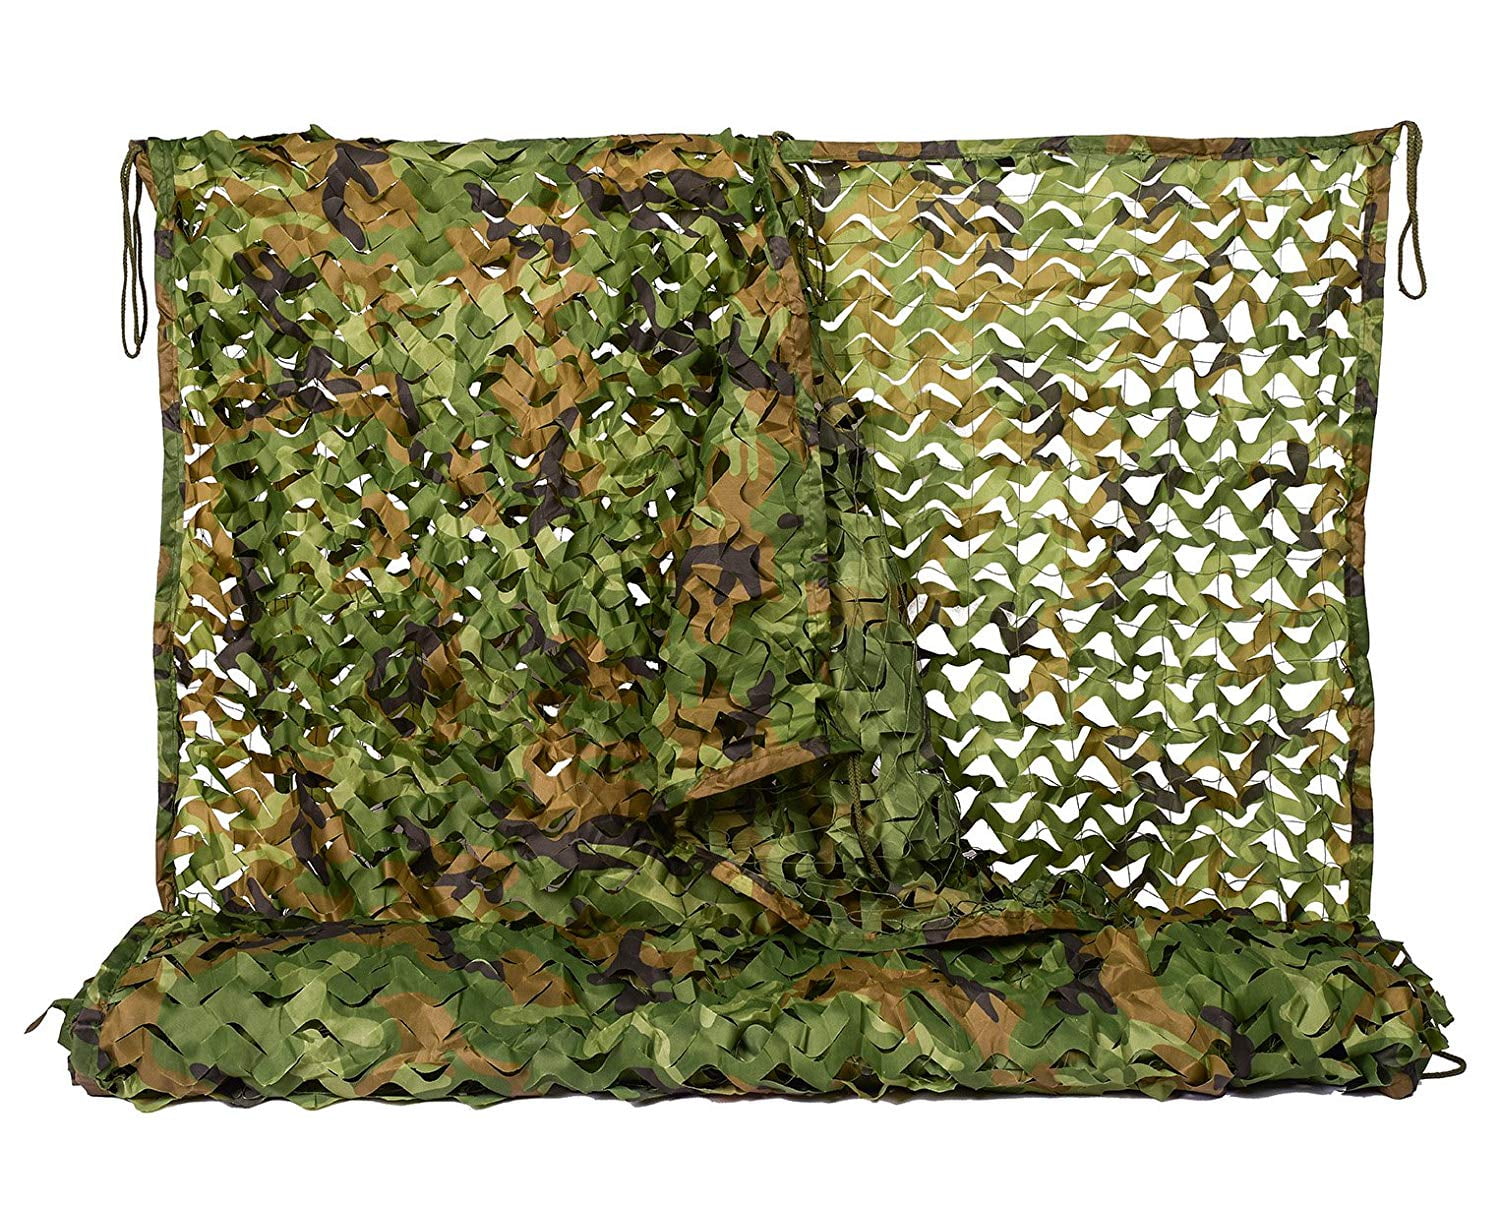 Army Camouflage Net Camo Netting Camping Shooting Hunting Hide Woodland Trendy 